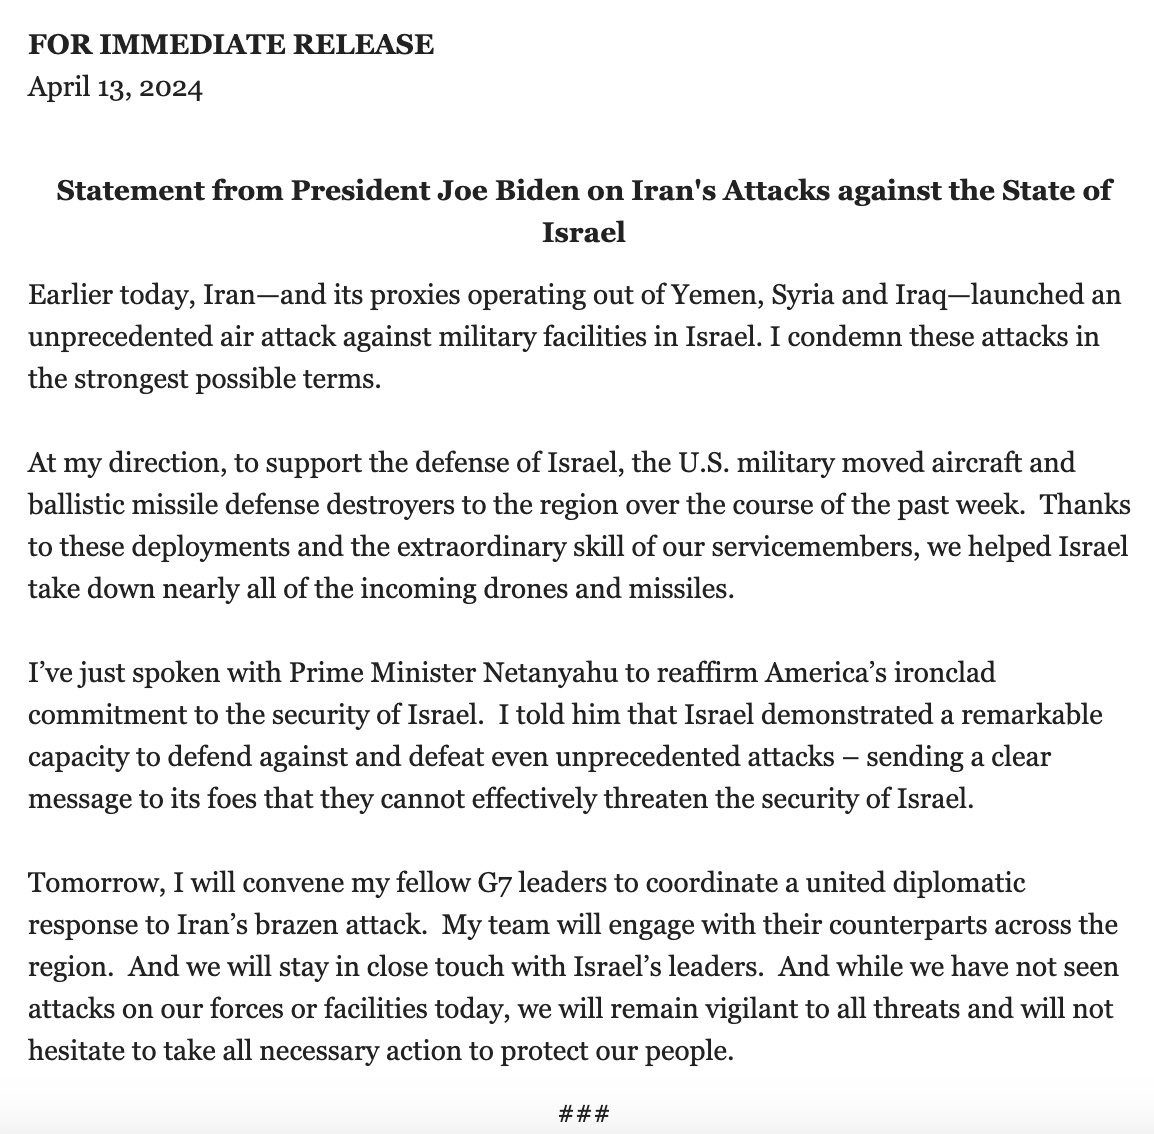 The White House has released a statement from President Biden condemning Iran's attack on Israel.  Biden: Tomorrow, I will convene my fellow G7 leaders to coordinate a united diplomatic response to Iran's brazen attack